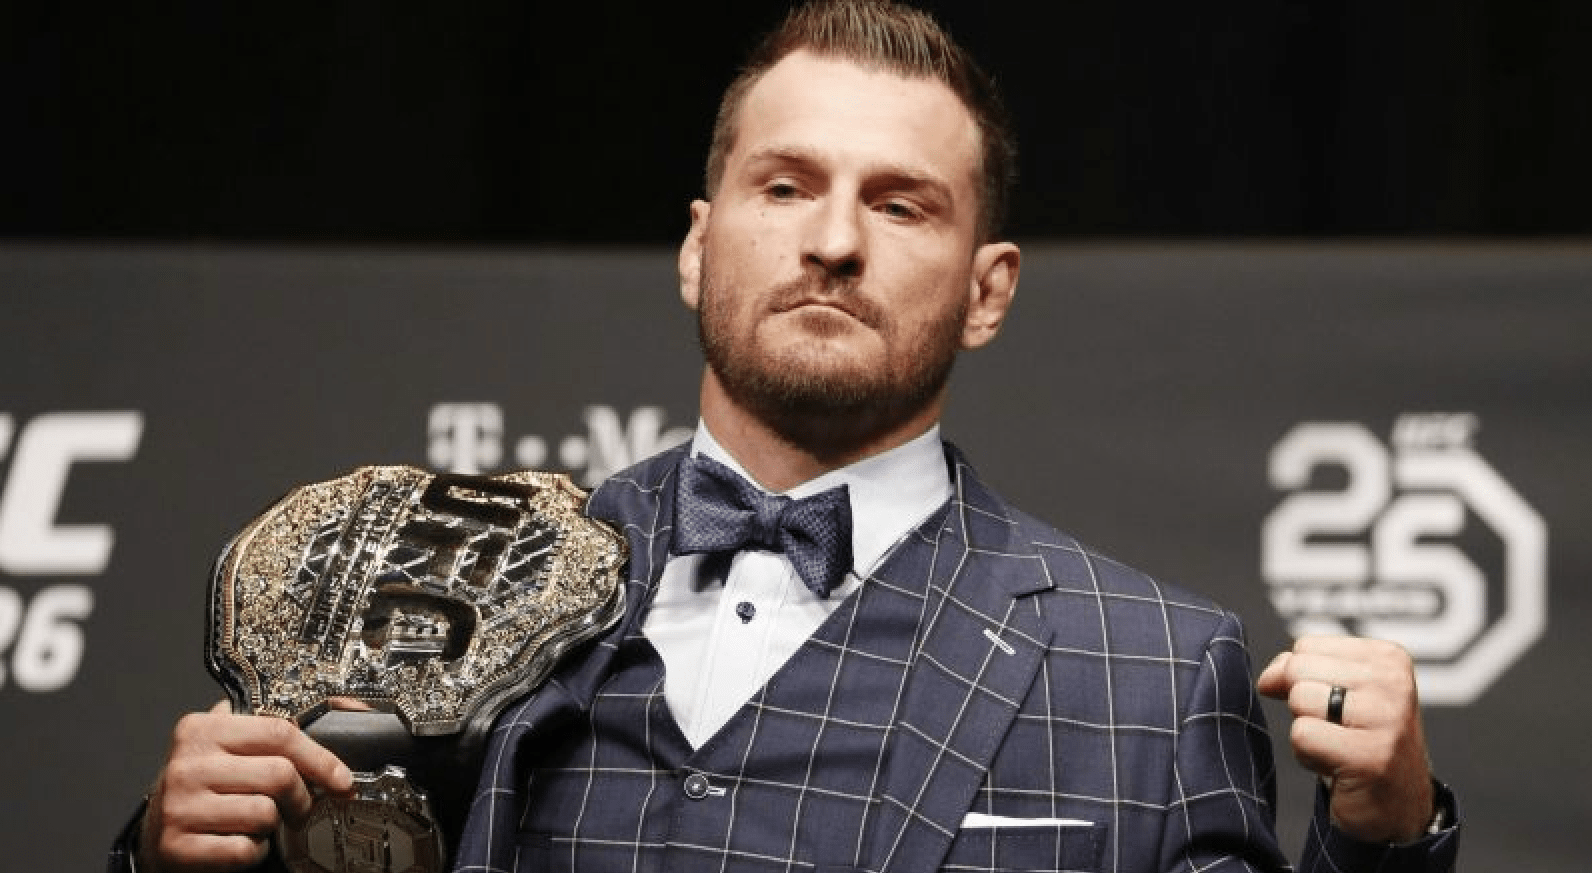 Miocic Prioritises First Responder Duties Over Fighting During Pandemic